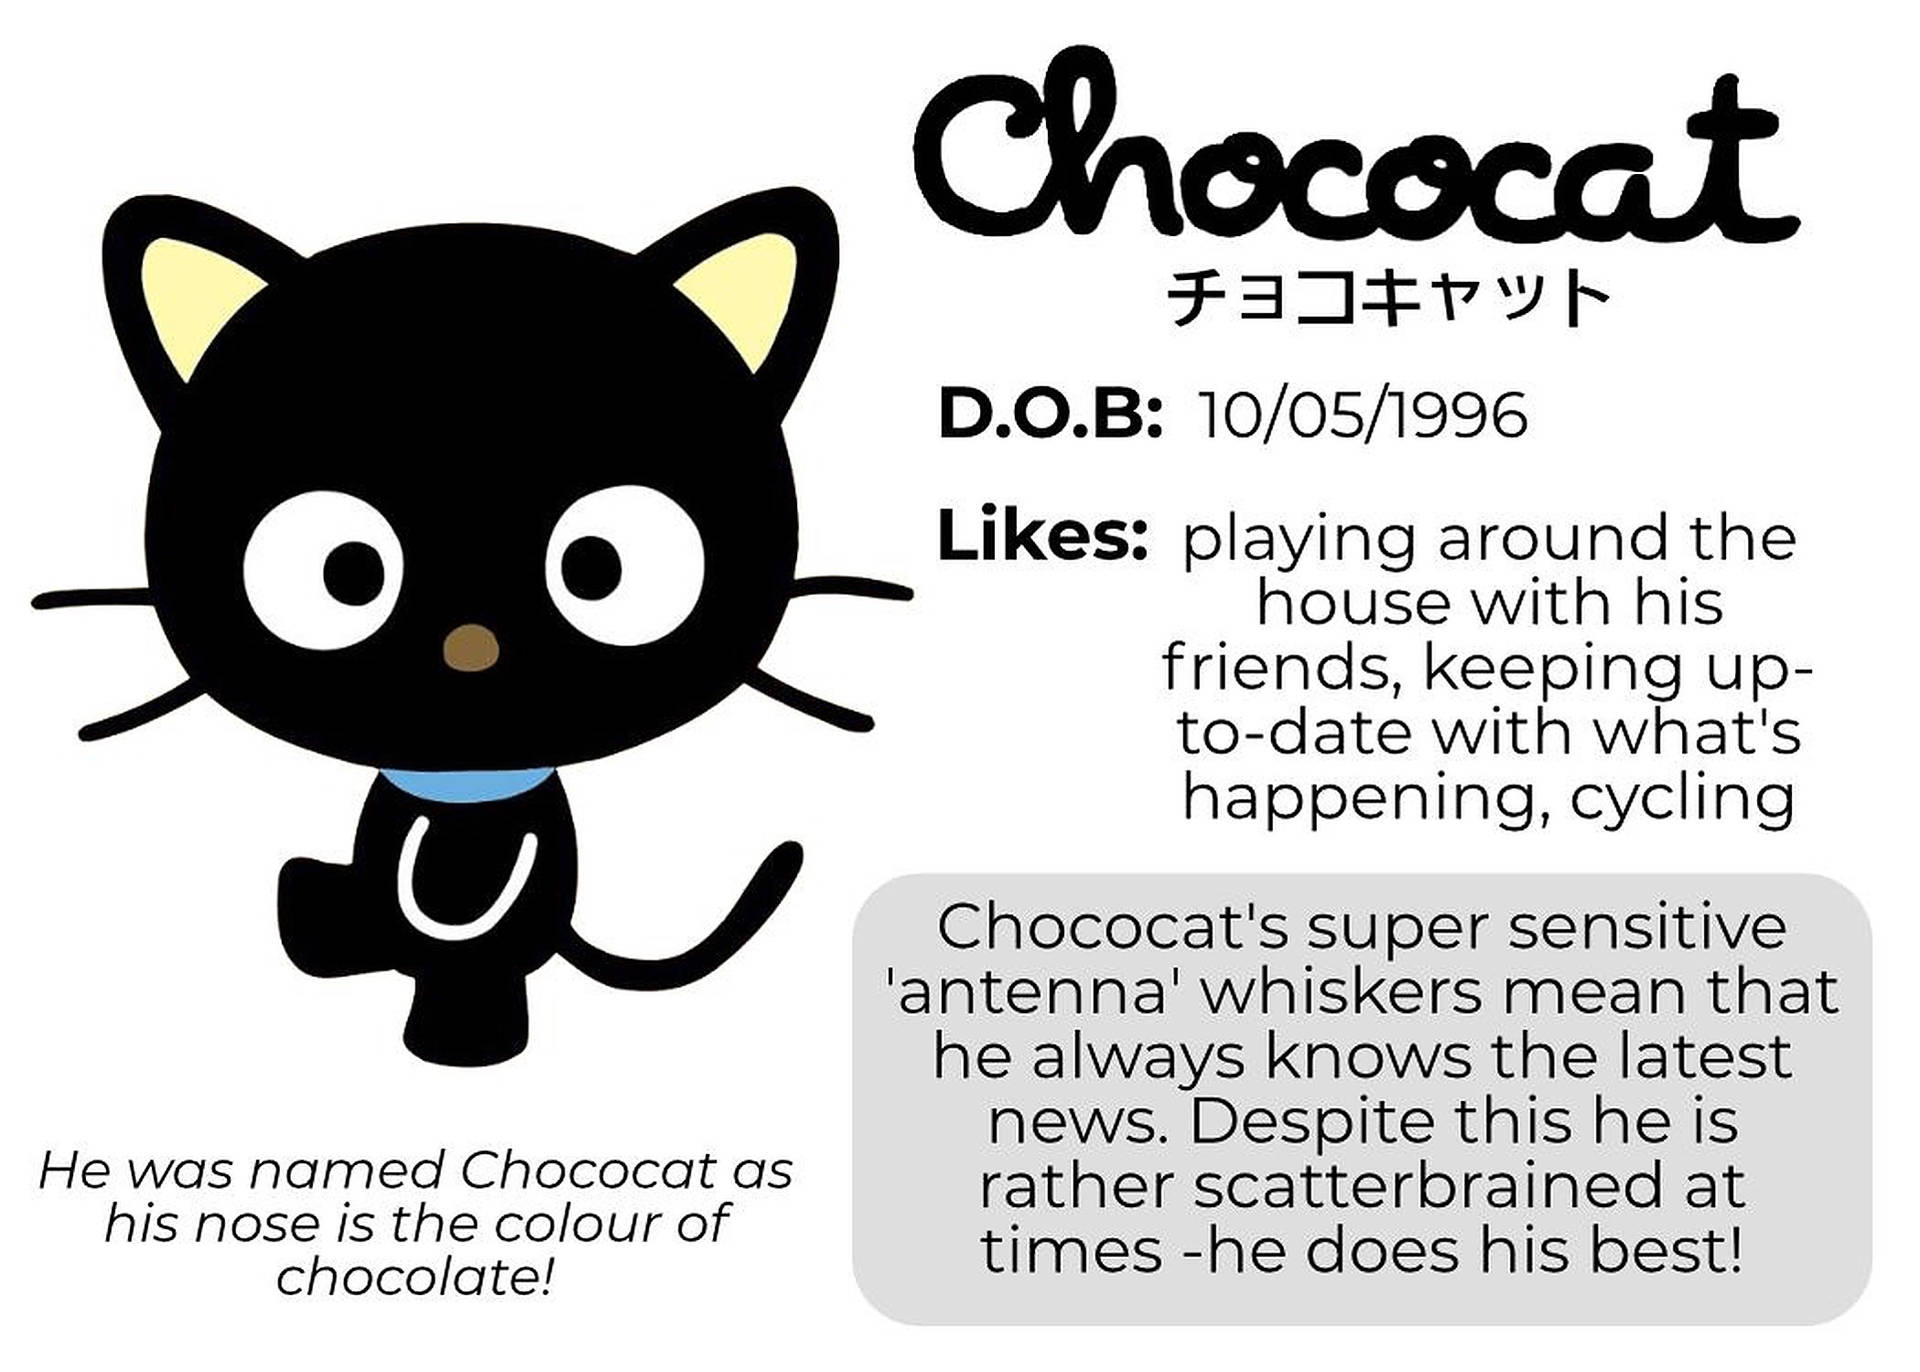 Adorable Chococat Image In High Definition